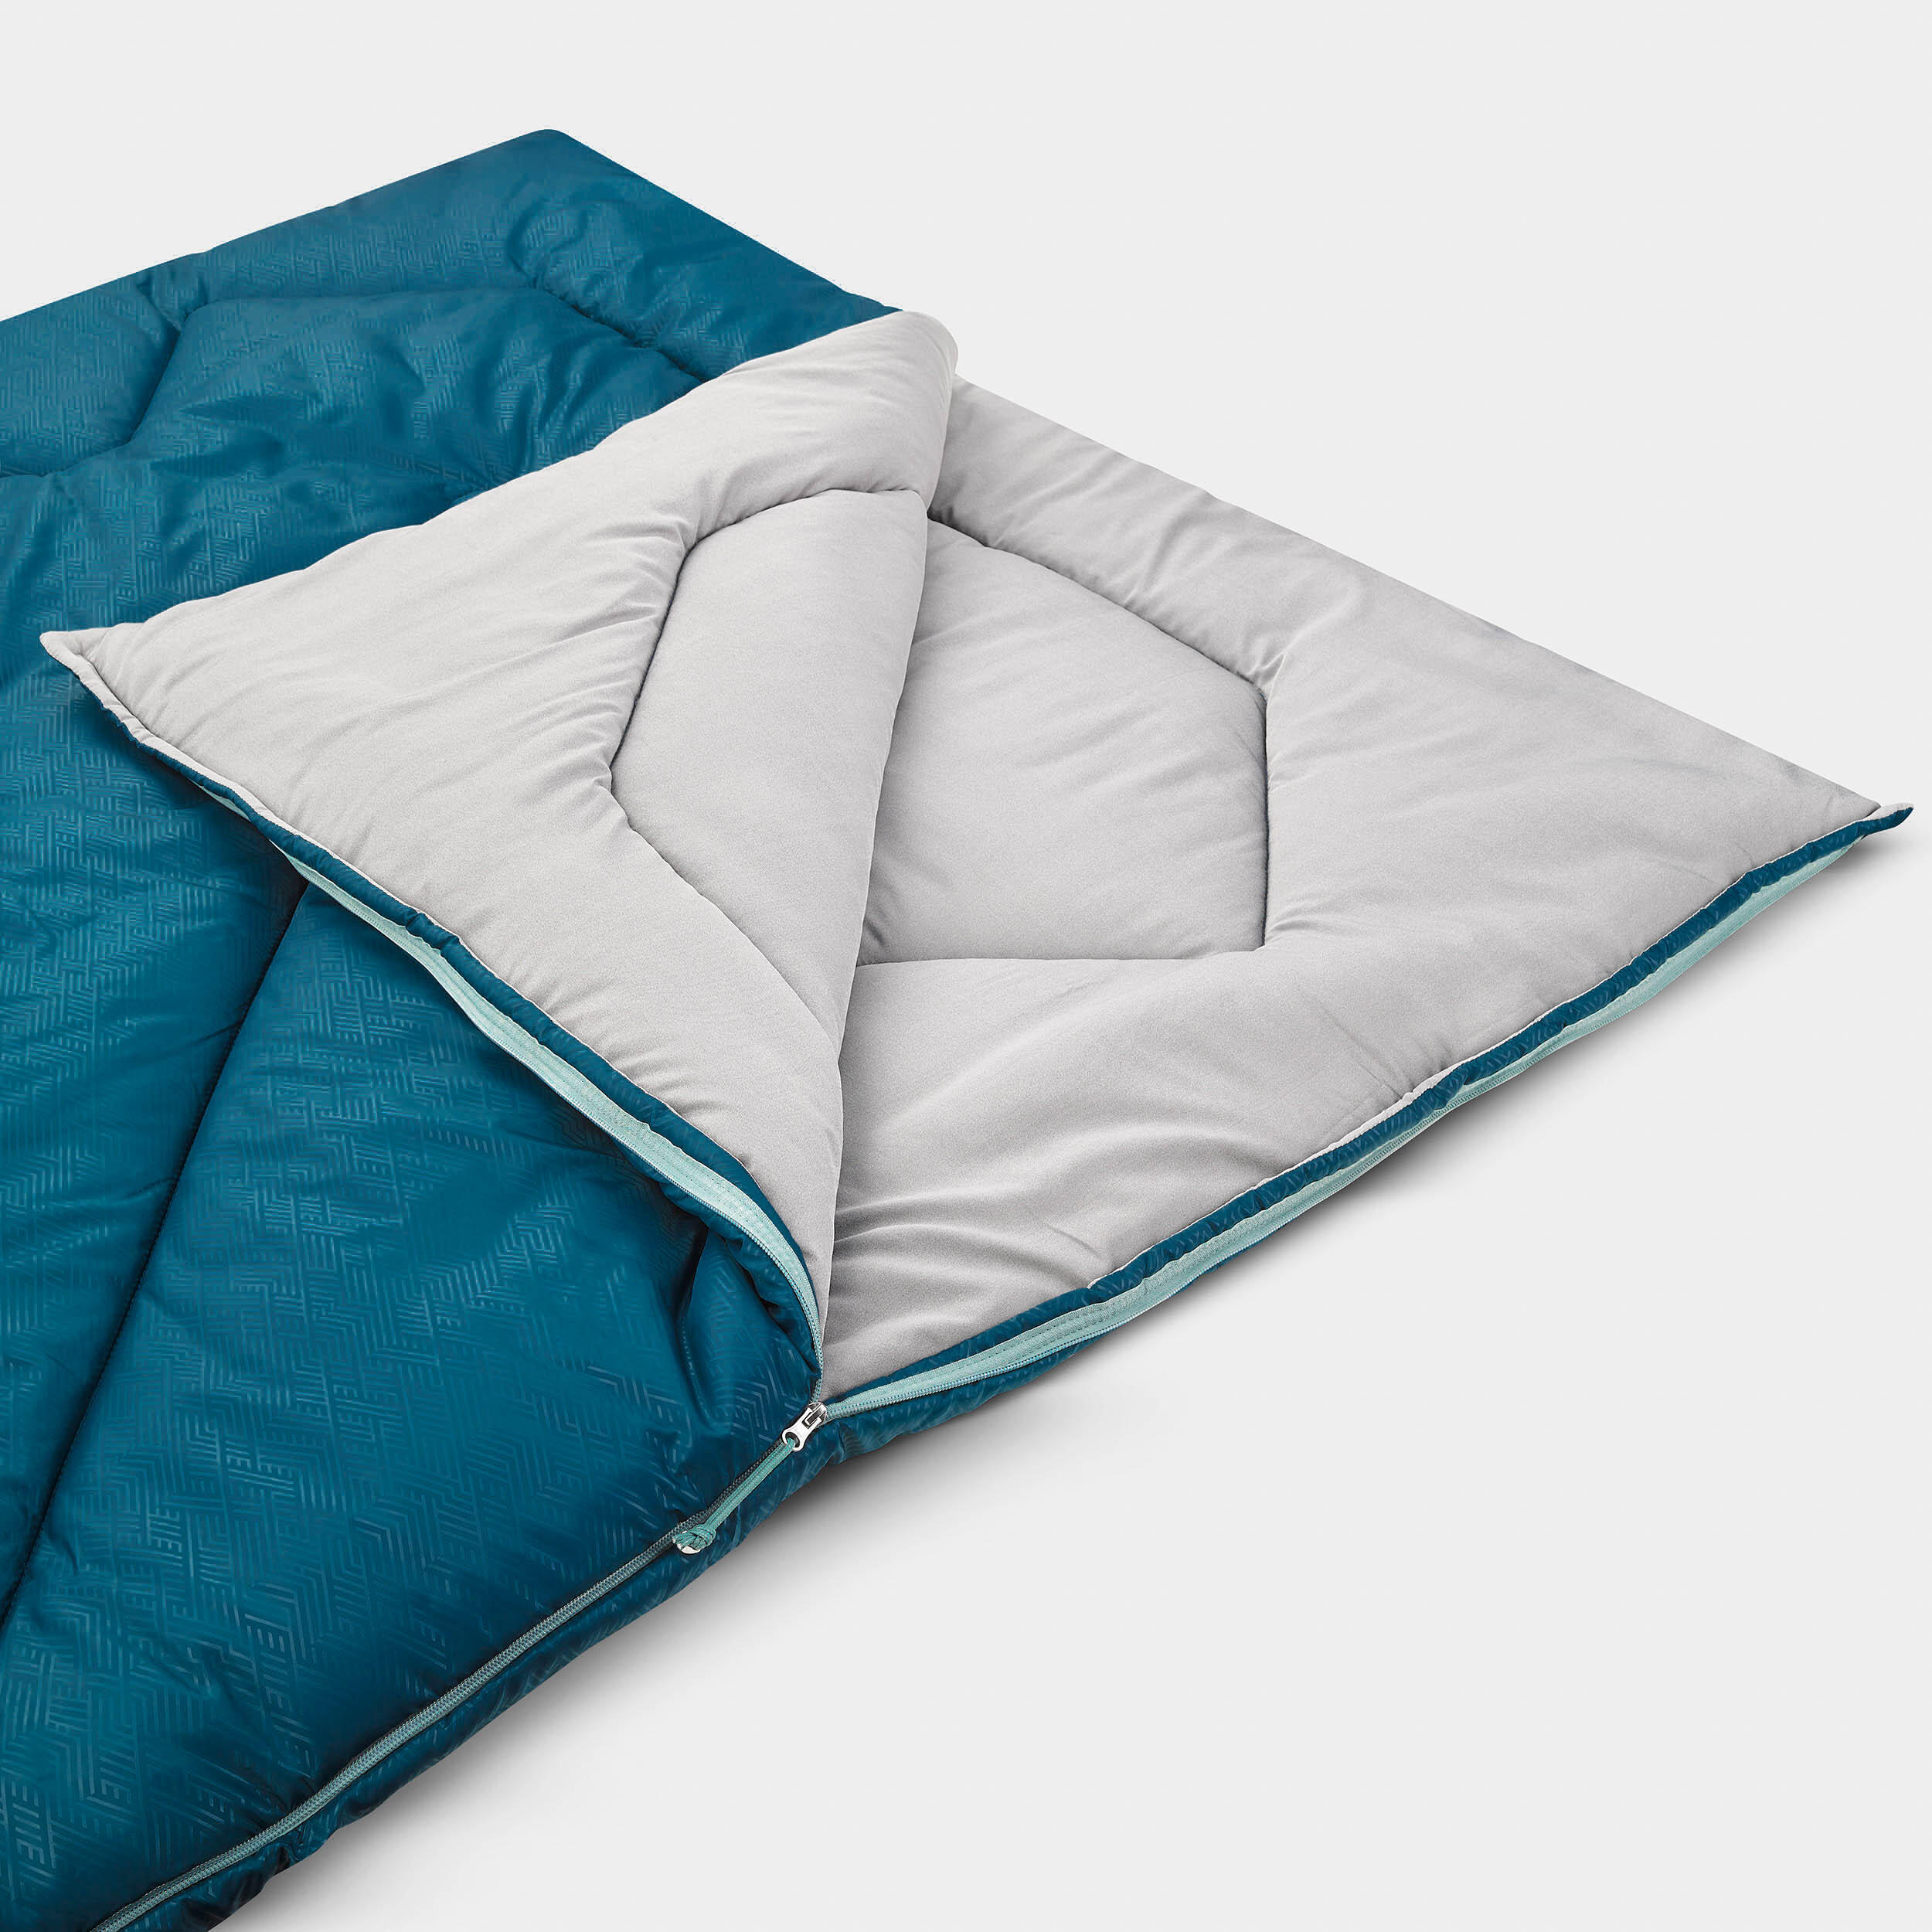 CAMPING SLEEPING BAG - ARPENAZ 10° DOUBLE - 2 PERSON 5/9